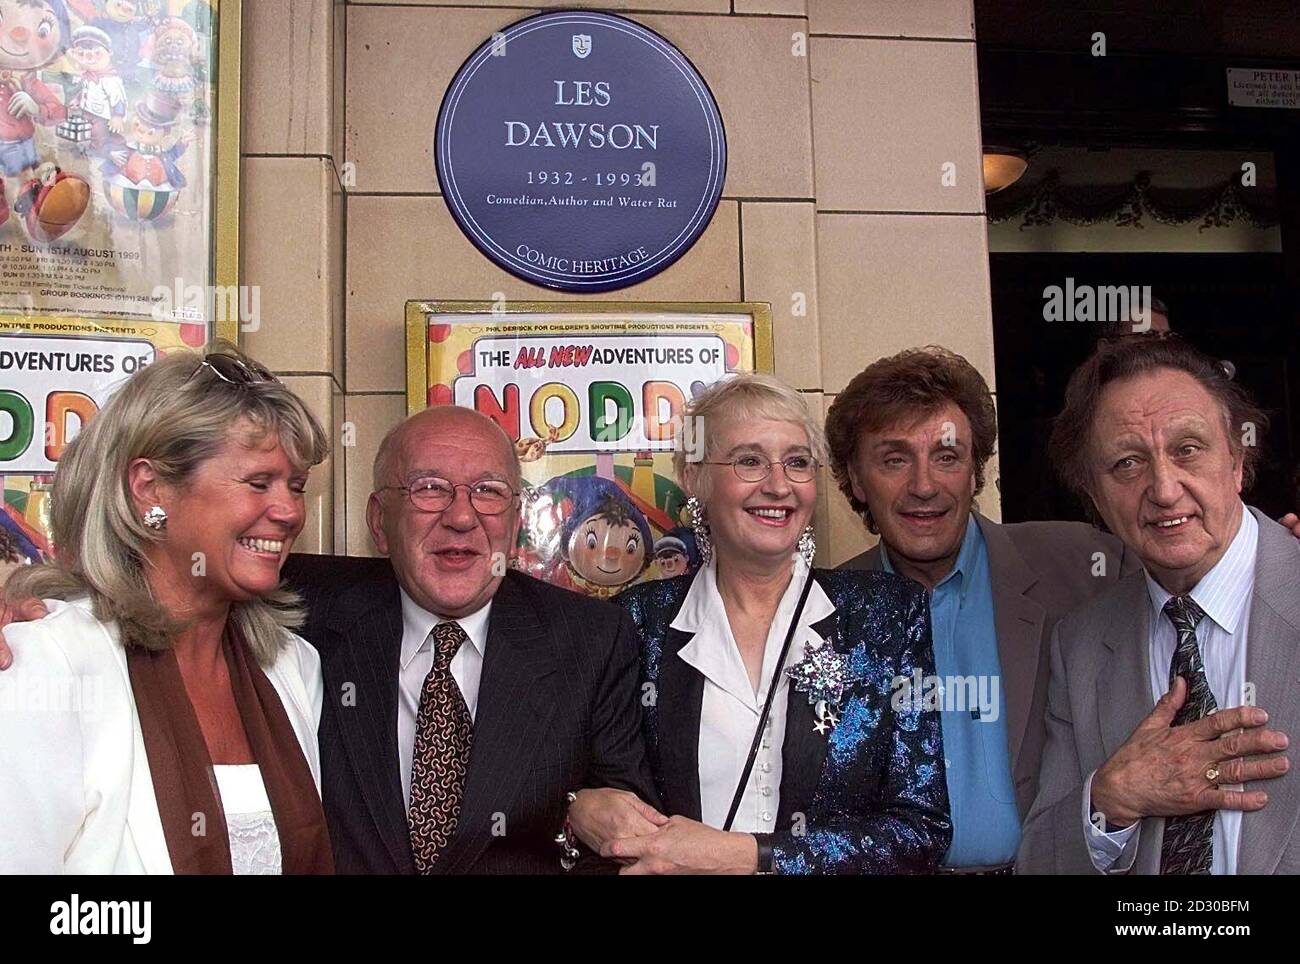 Blue Plaque For Les Dawson High Resolution Stock Photography And Images Alamy